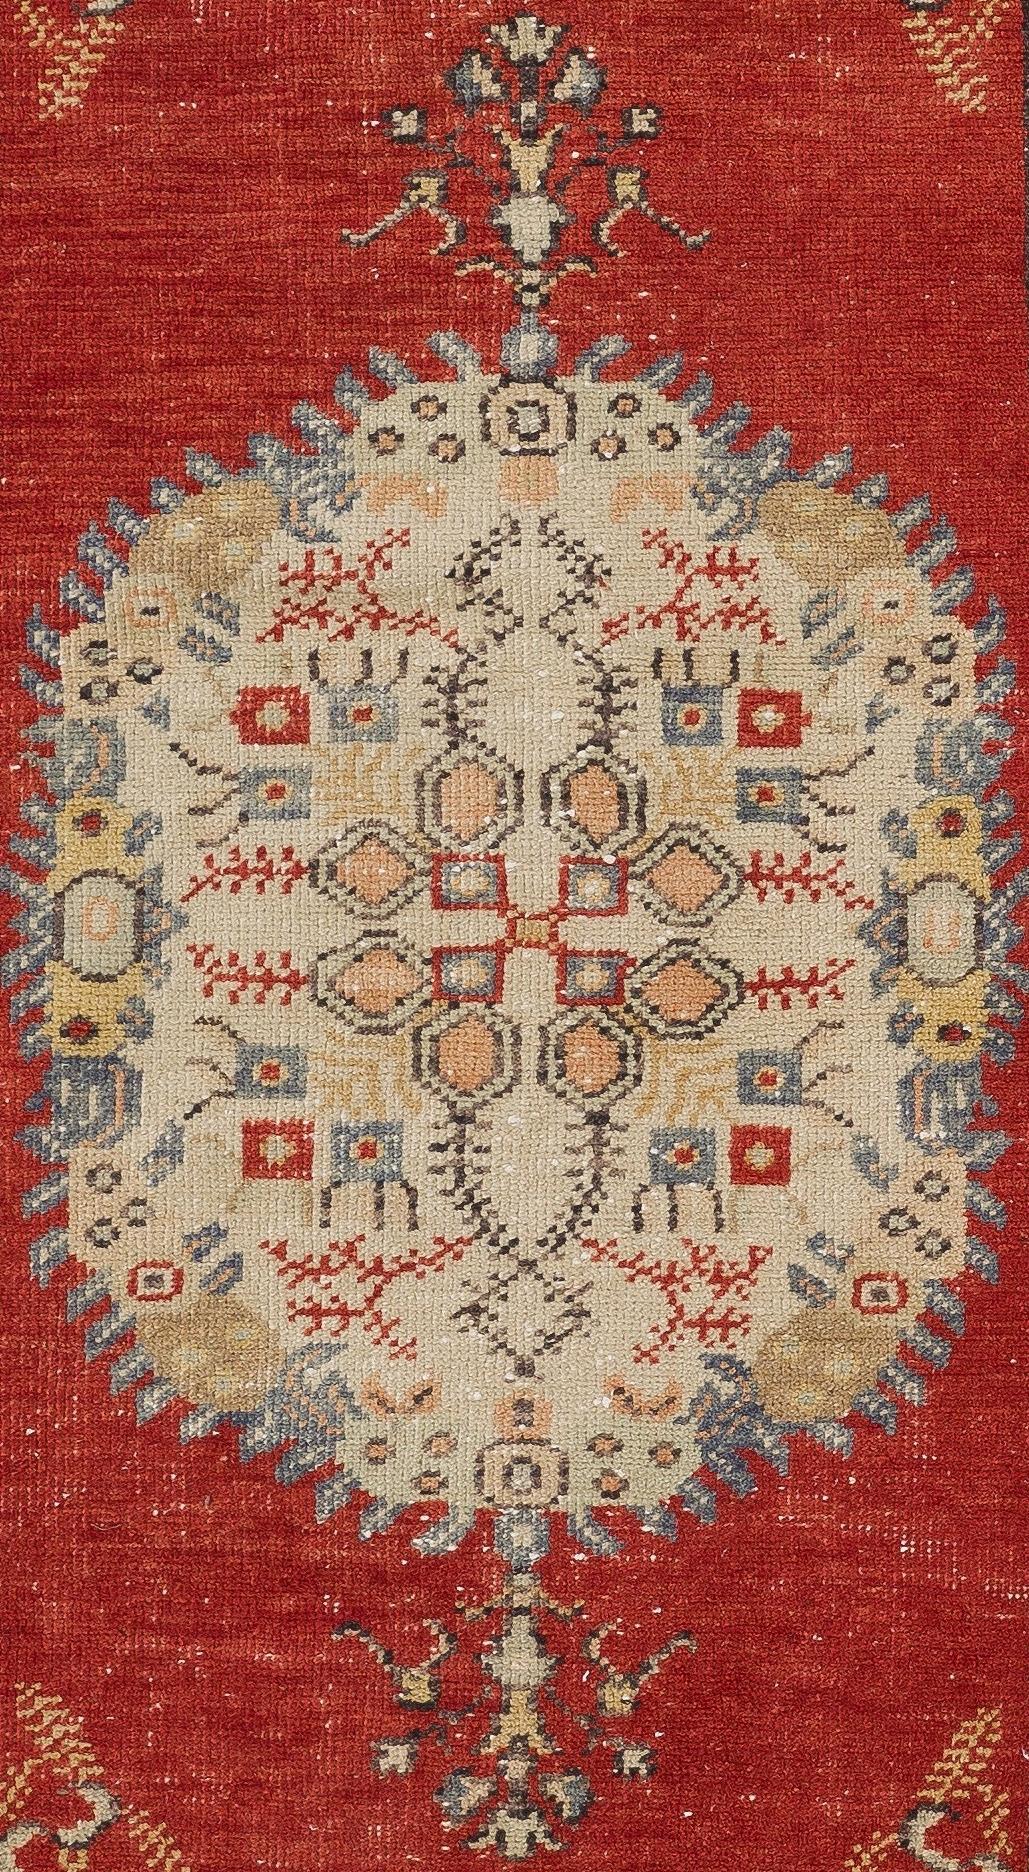 Hand-Woven 3x6.4 Ft Vintage Handmade Unique Turkish Wool Accent Rug in Red and Ivory For Sale